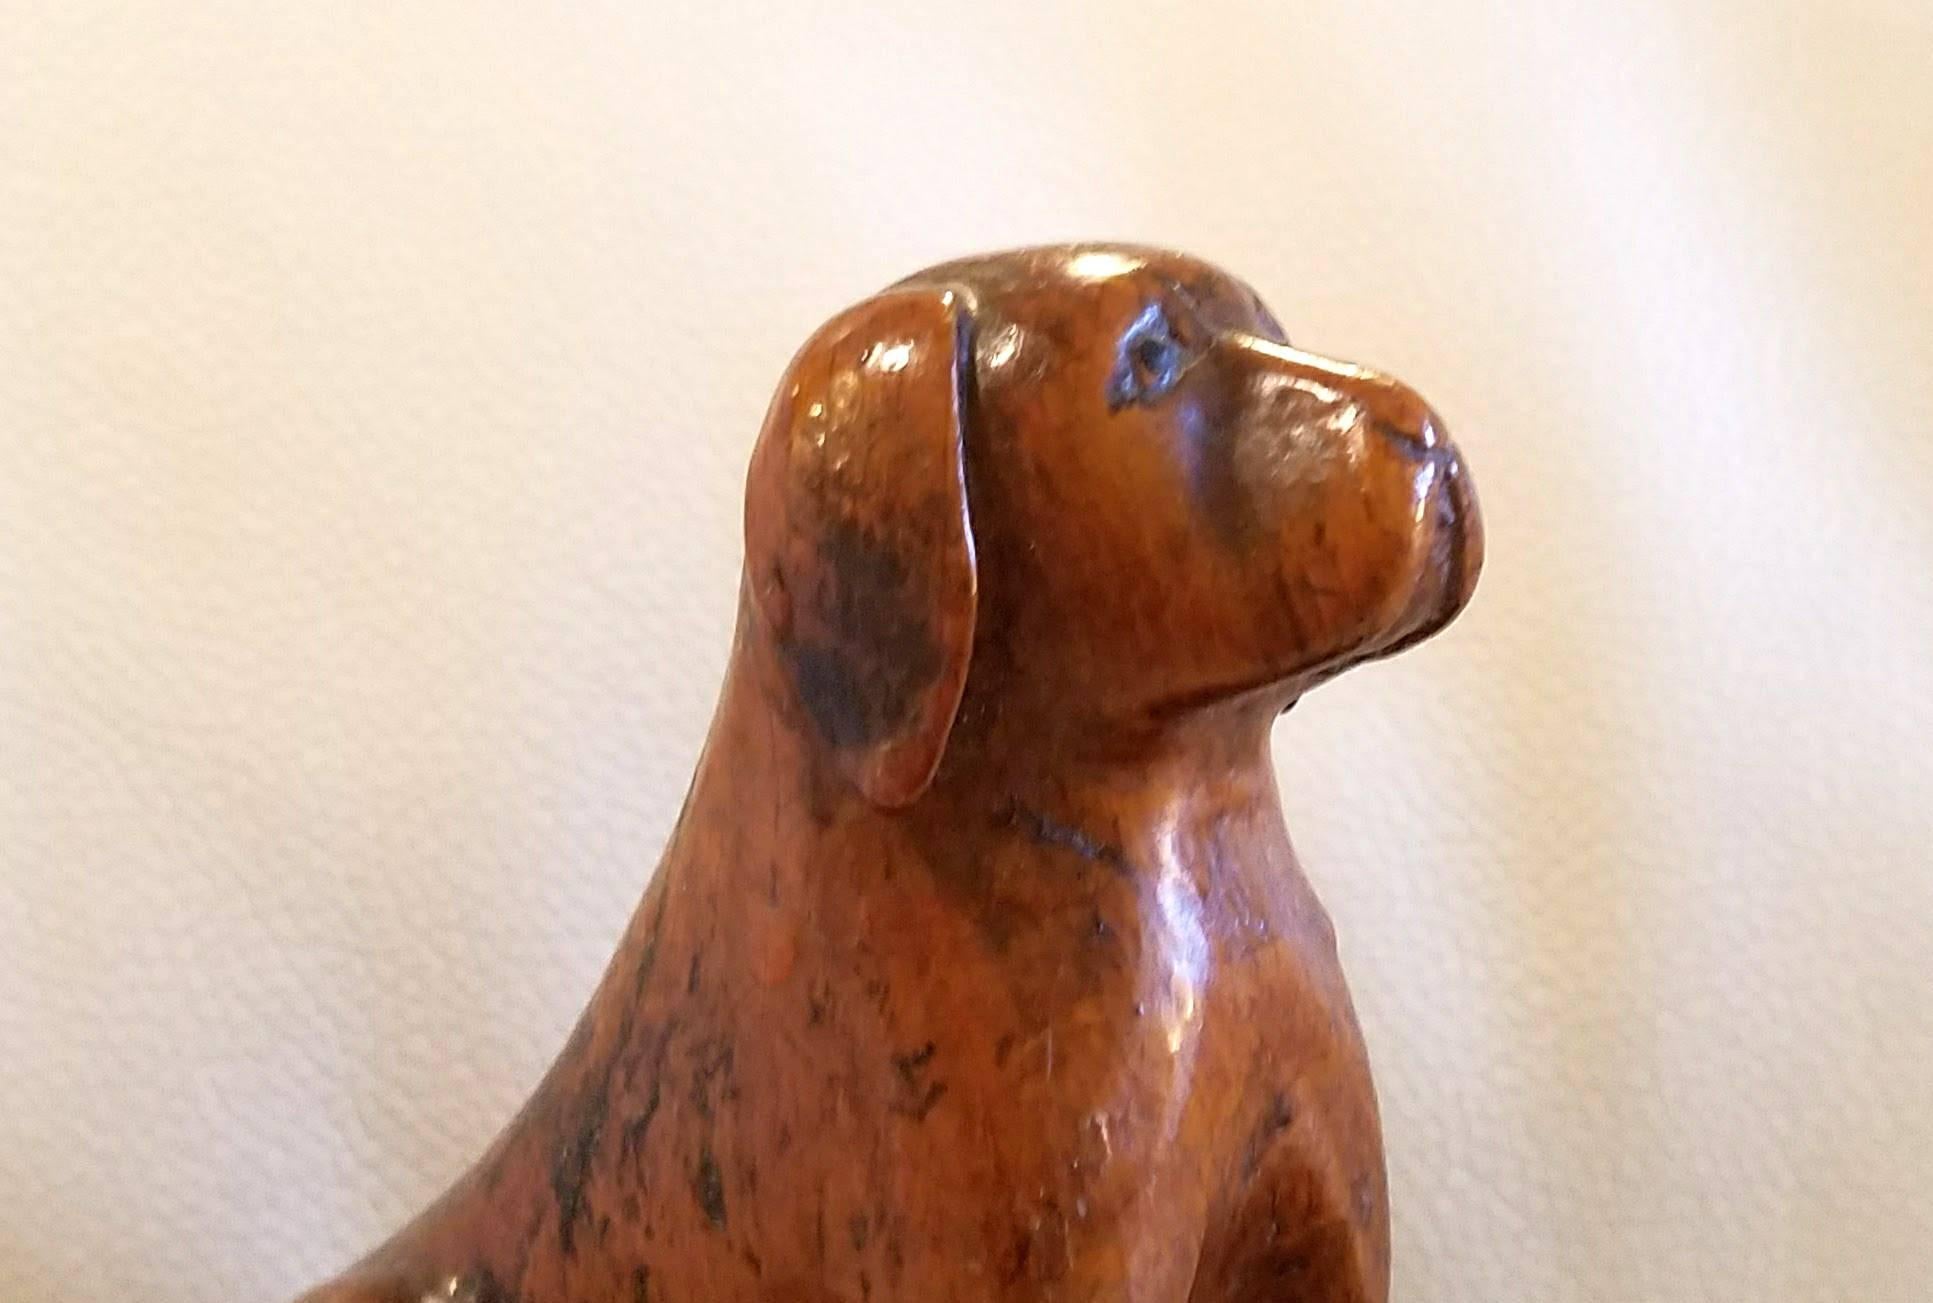 Oak treen dogs, probably pugs, 19th century.

The dog and bitch sit on their haunches looking at each other with endearing expressions. Carved in solid oak with a naturalistic base, these portraits probably depict someone's favourite